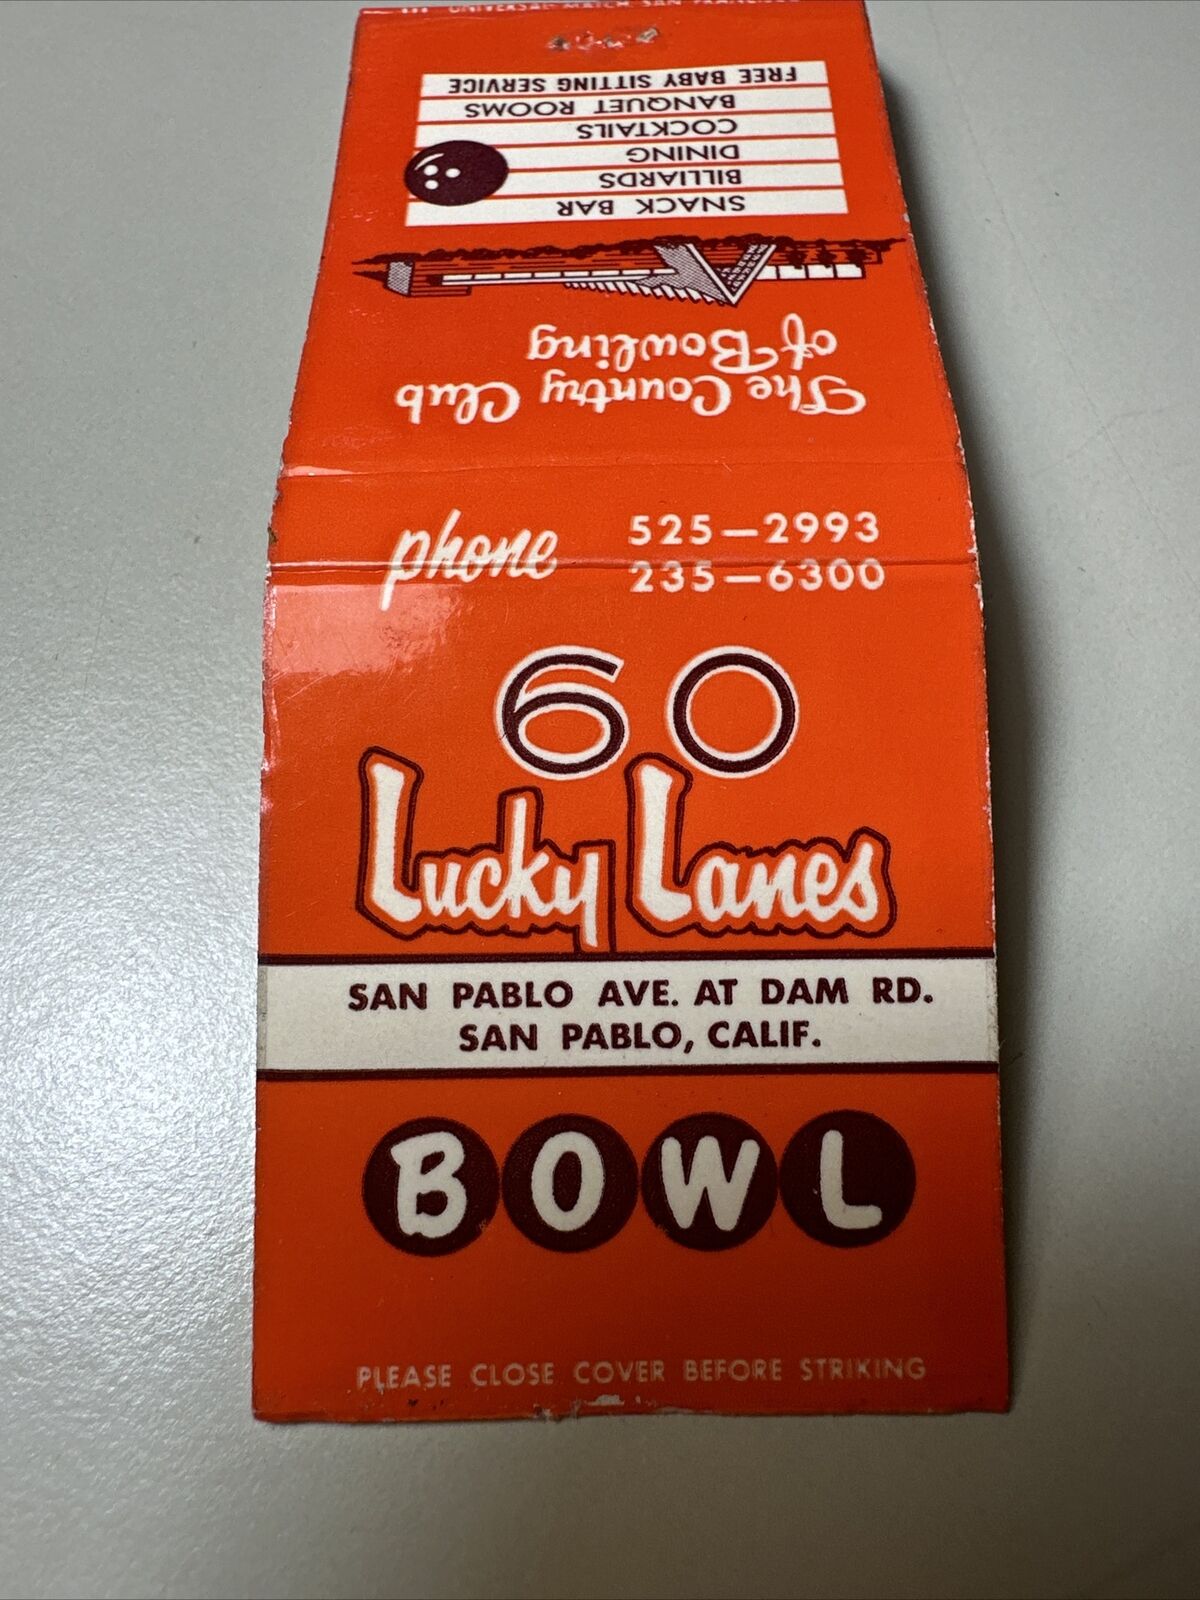 VTG 1960s Lucky Lanes Bowling Matchbook Cover San Pablo California Mid-Century